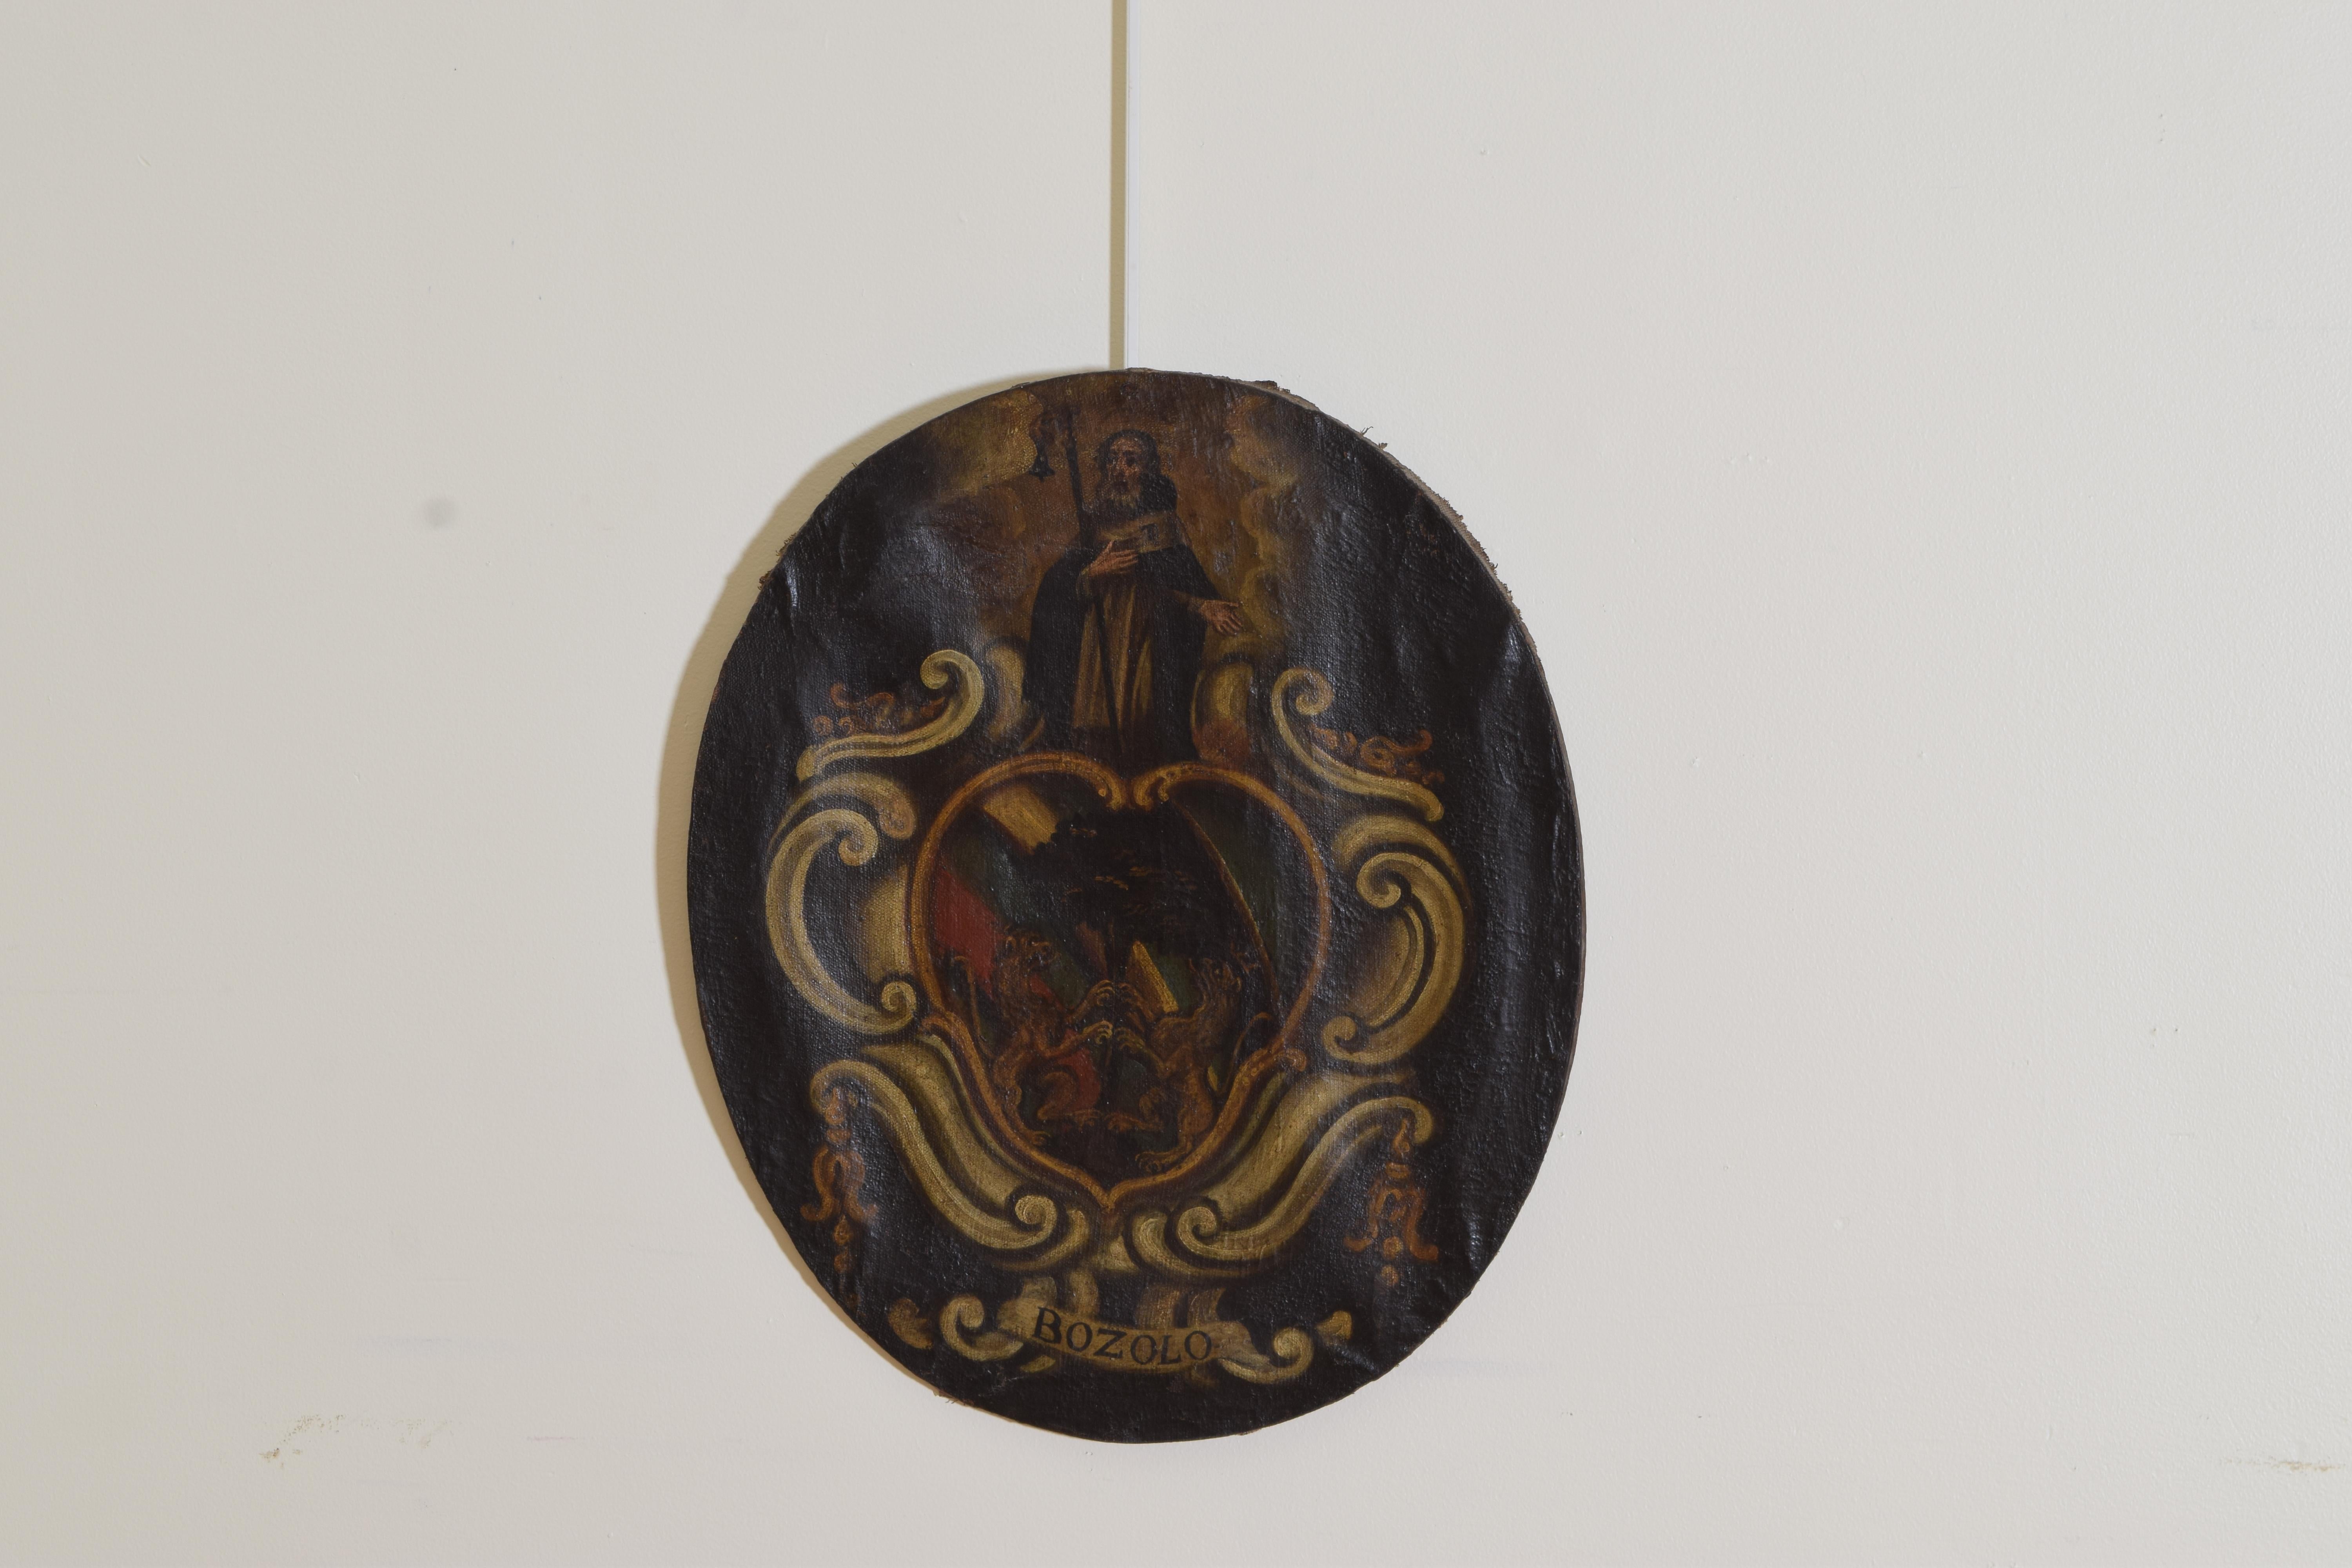 The oval painting featuring Saint Christopher emerging from parting clouds standing atop a ground of intertwined c-scrolls, at the center is a tree with two lions ascending, the family name Bozolo centered at the bottom.